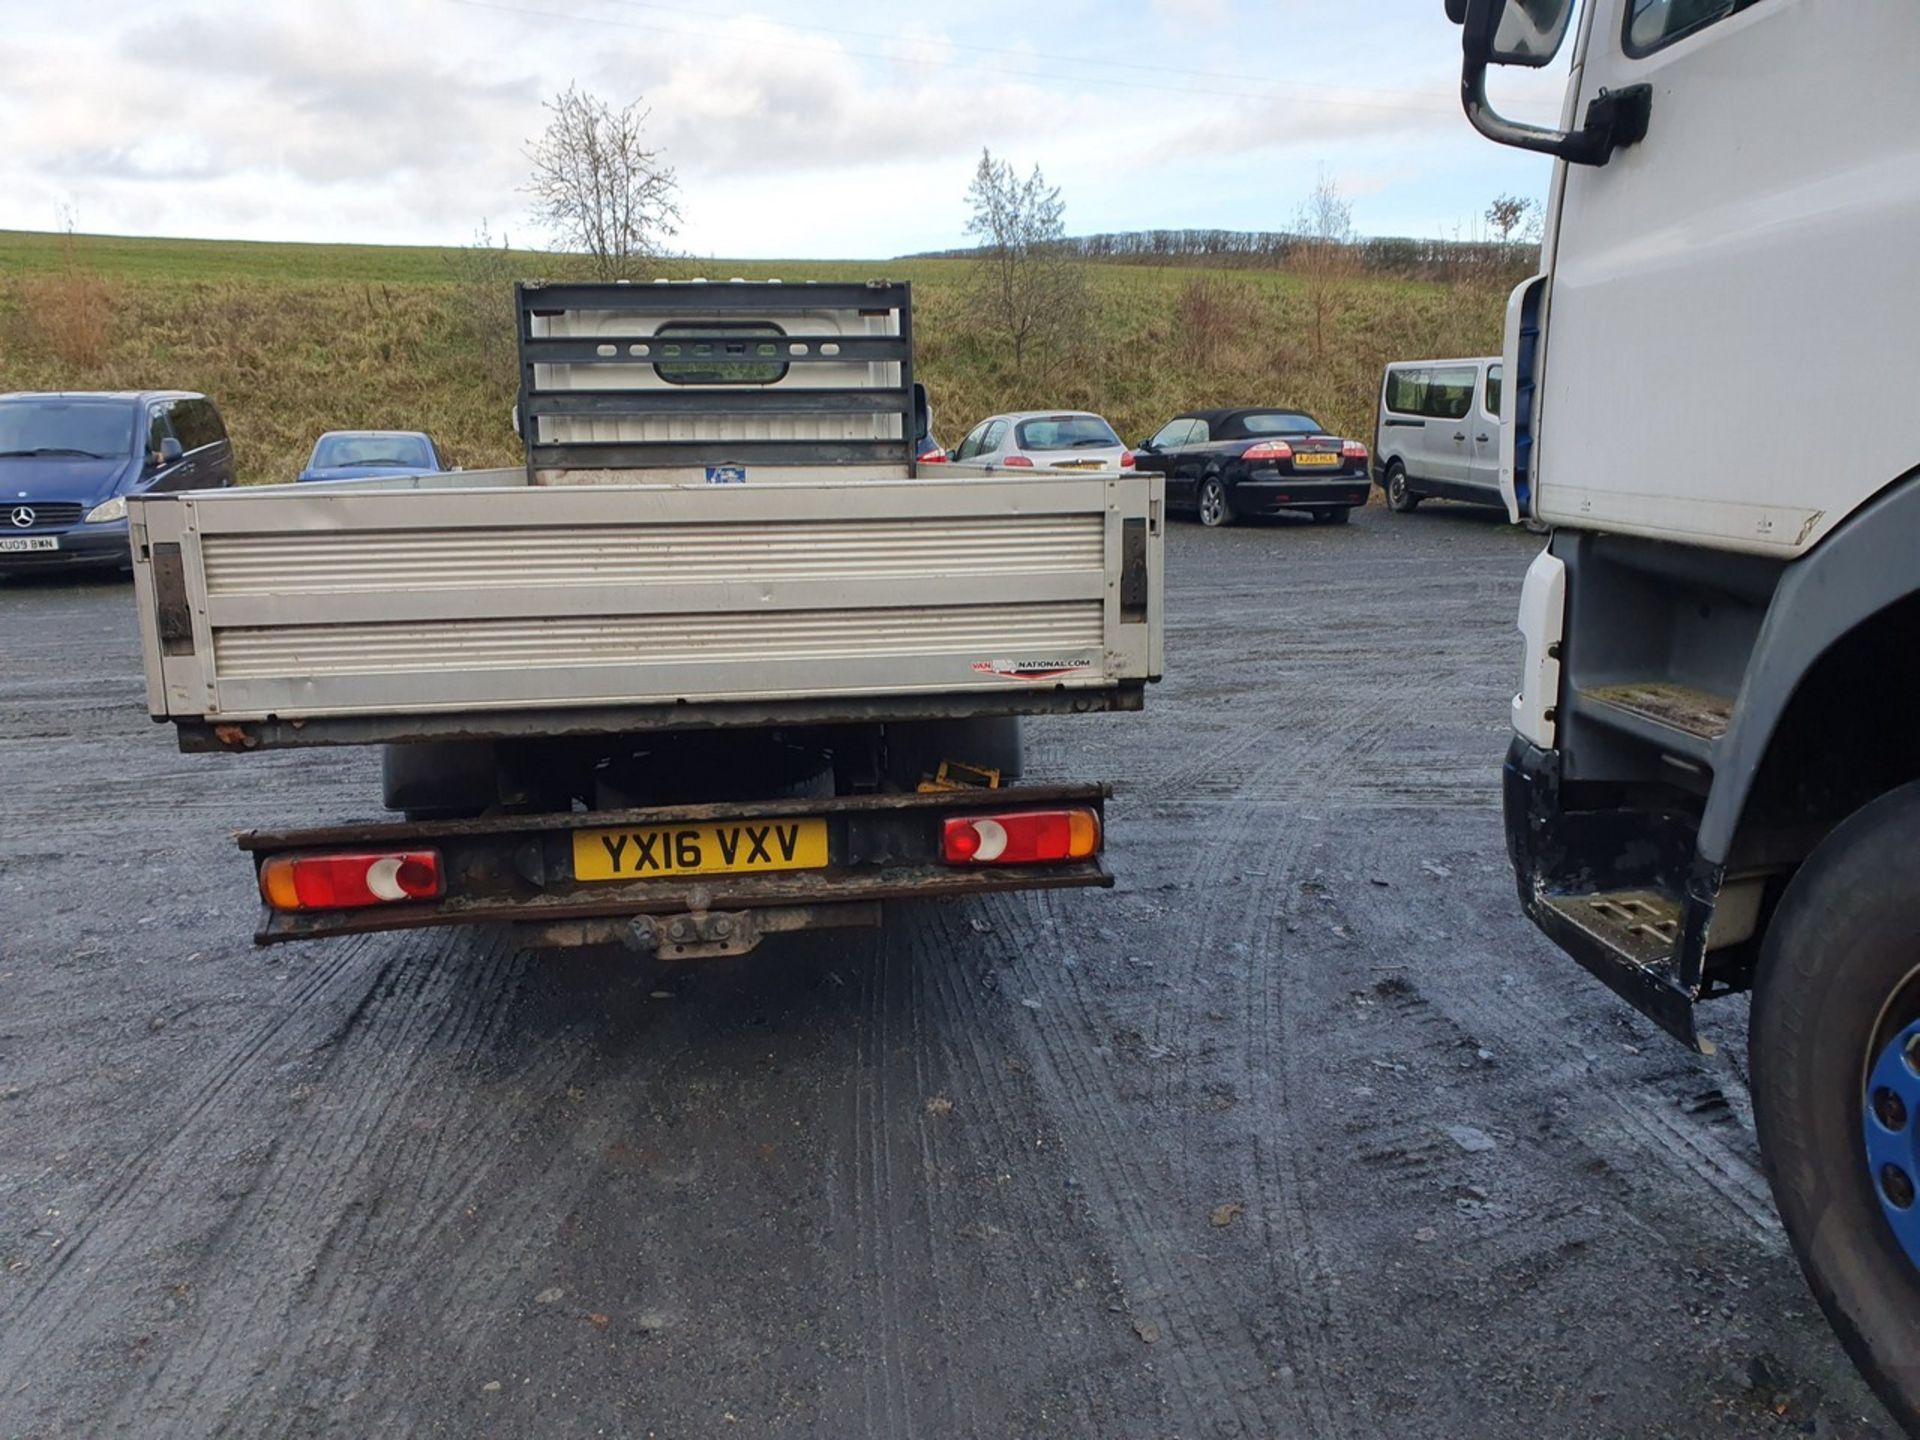 16/16 NISSAN NT400 CABSTAR 35.14 LWB D - 2488cc 2dr Flat Bed (White) - Image 11 of 33